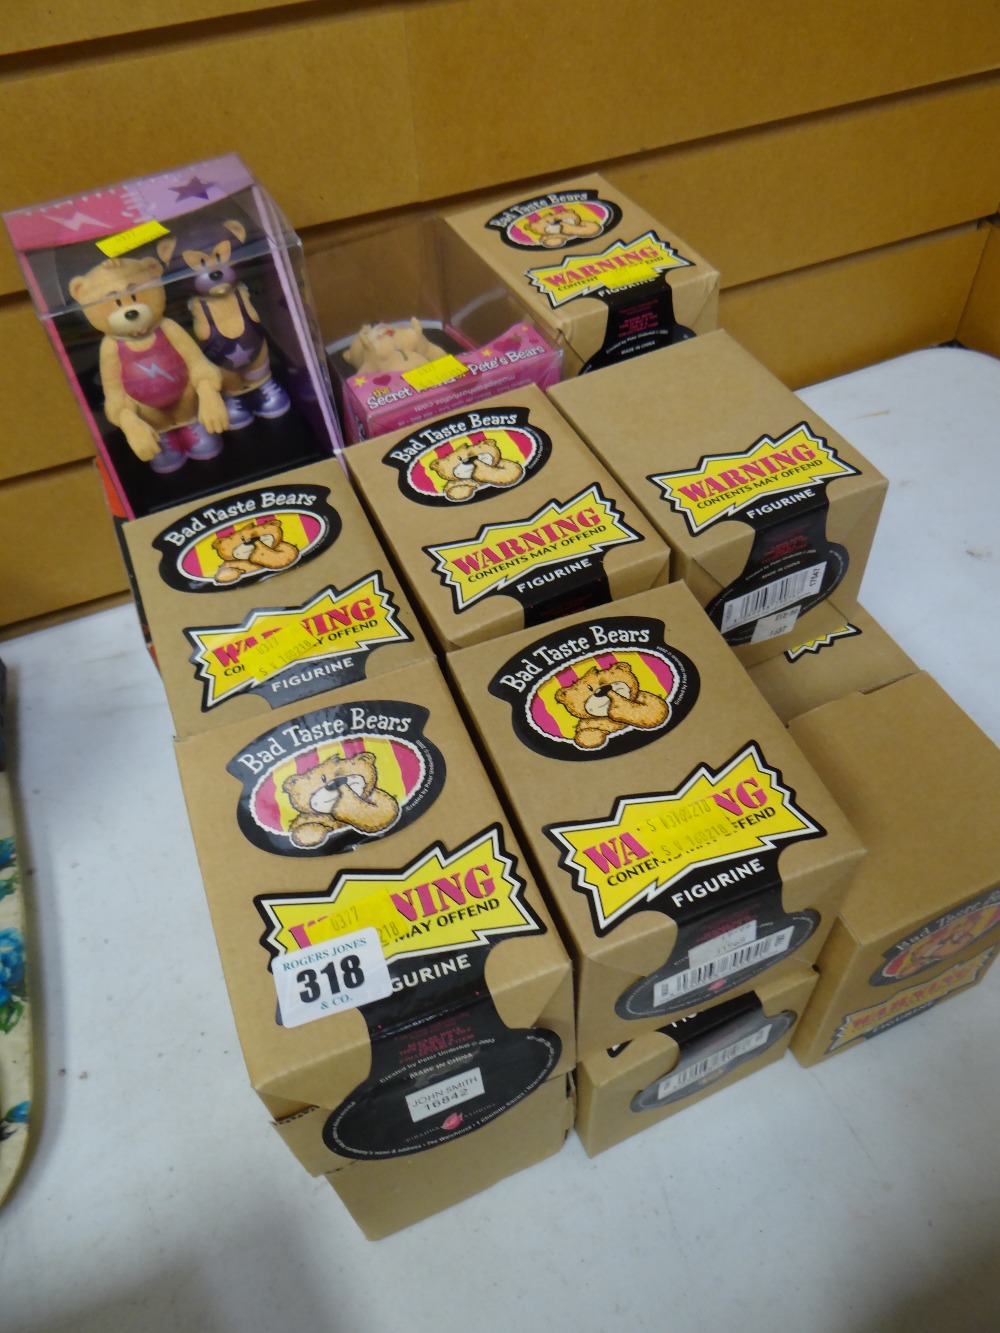 Collection of boxed 'Bad Taste Bears'